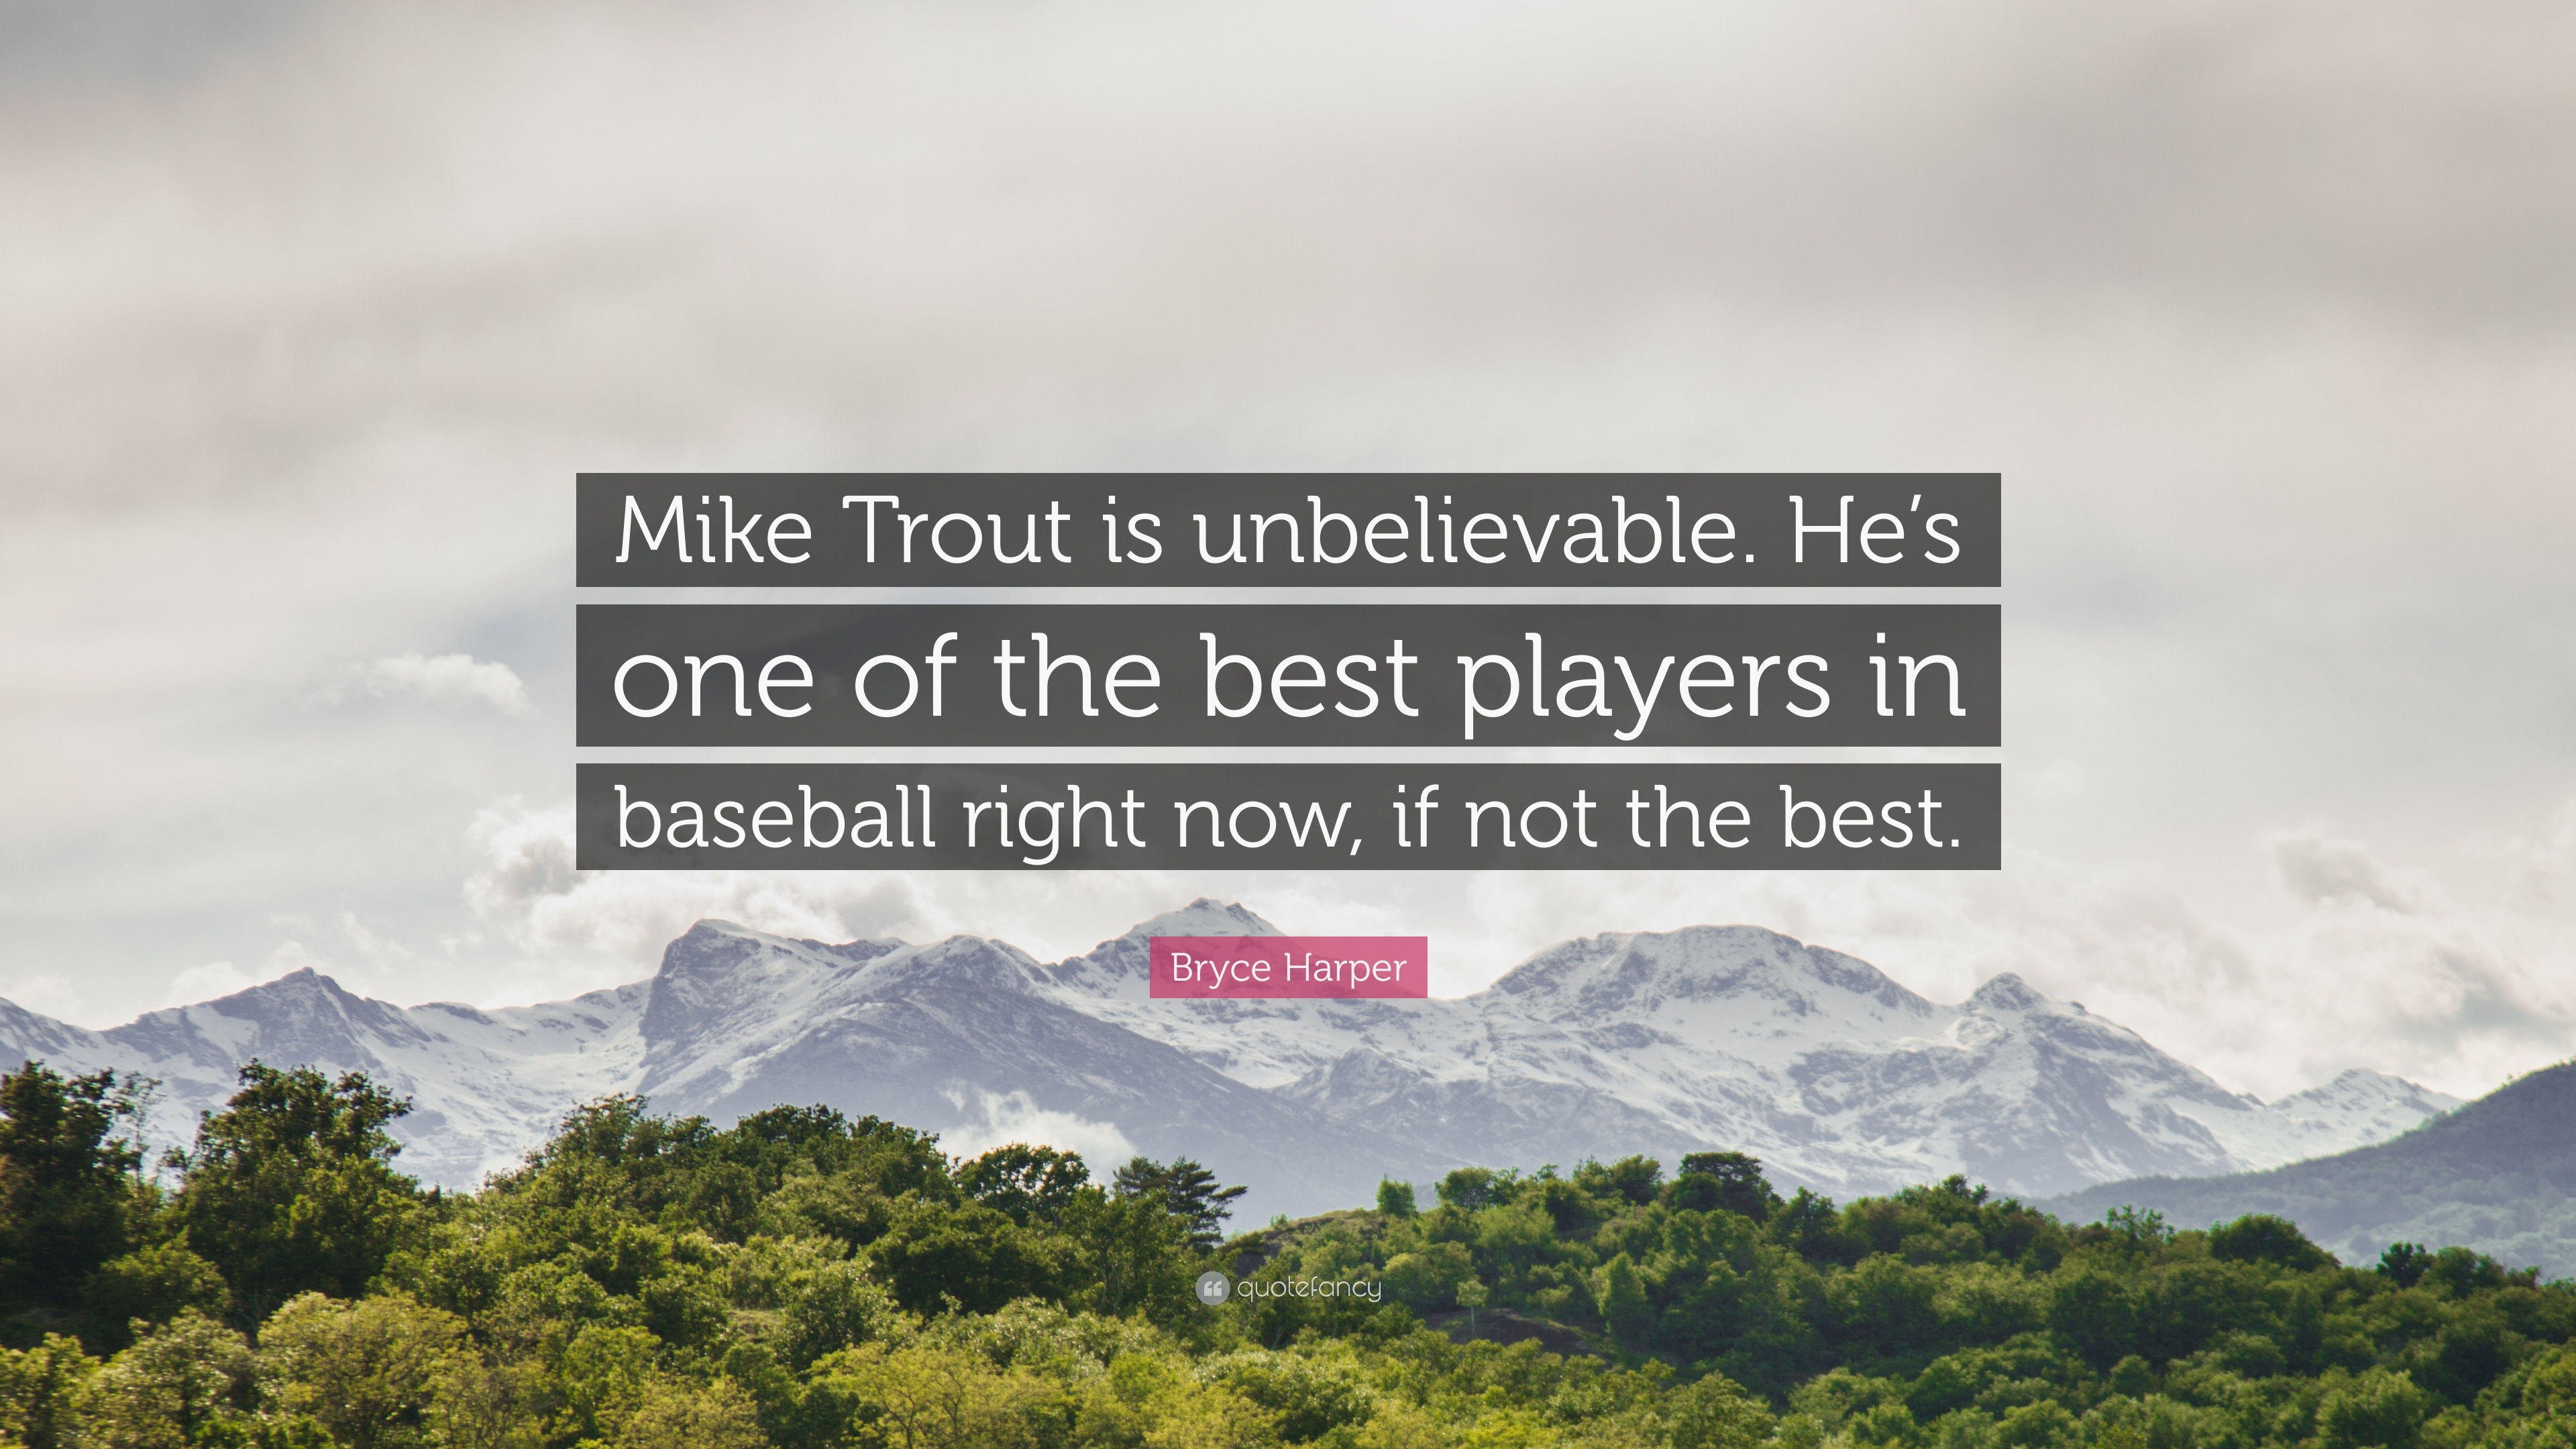 Bryce Harper Quote: “Mike Trout is unbelievable. He's one of the best  players in baseball right